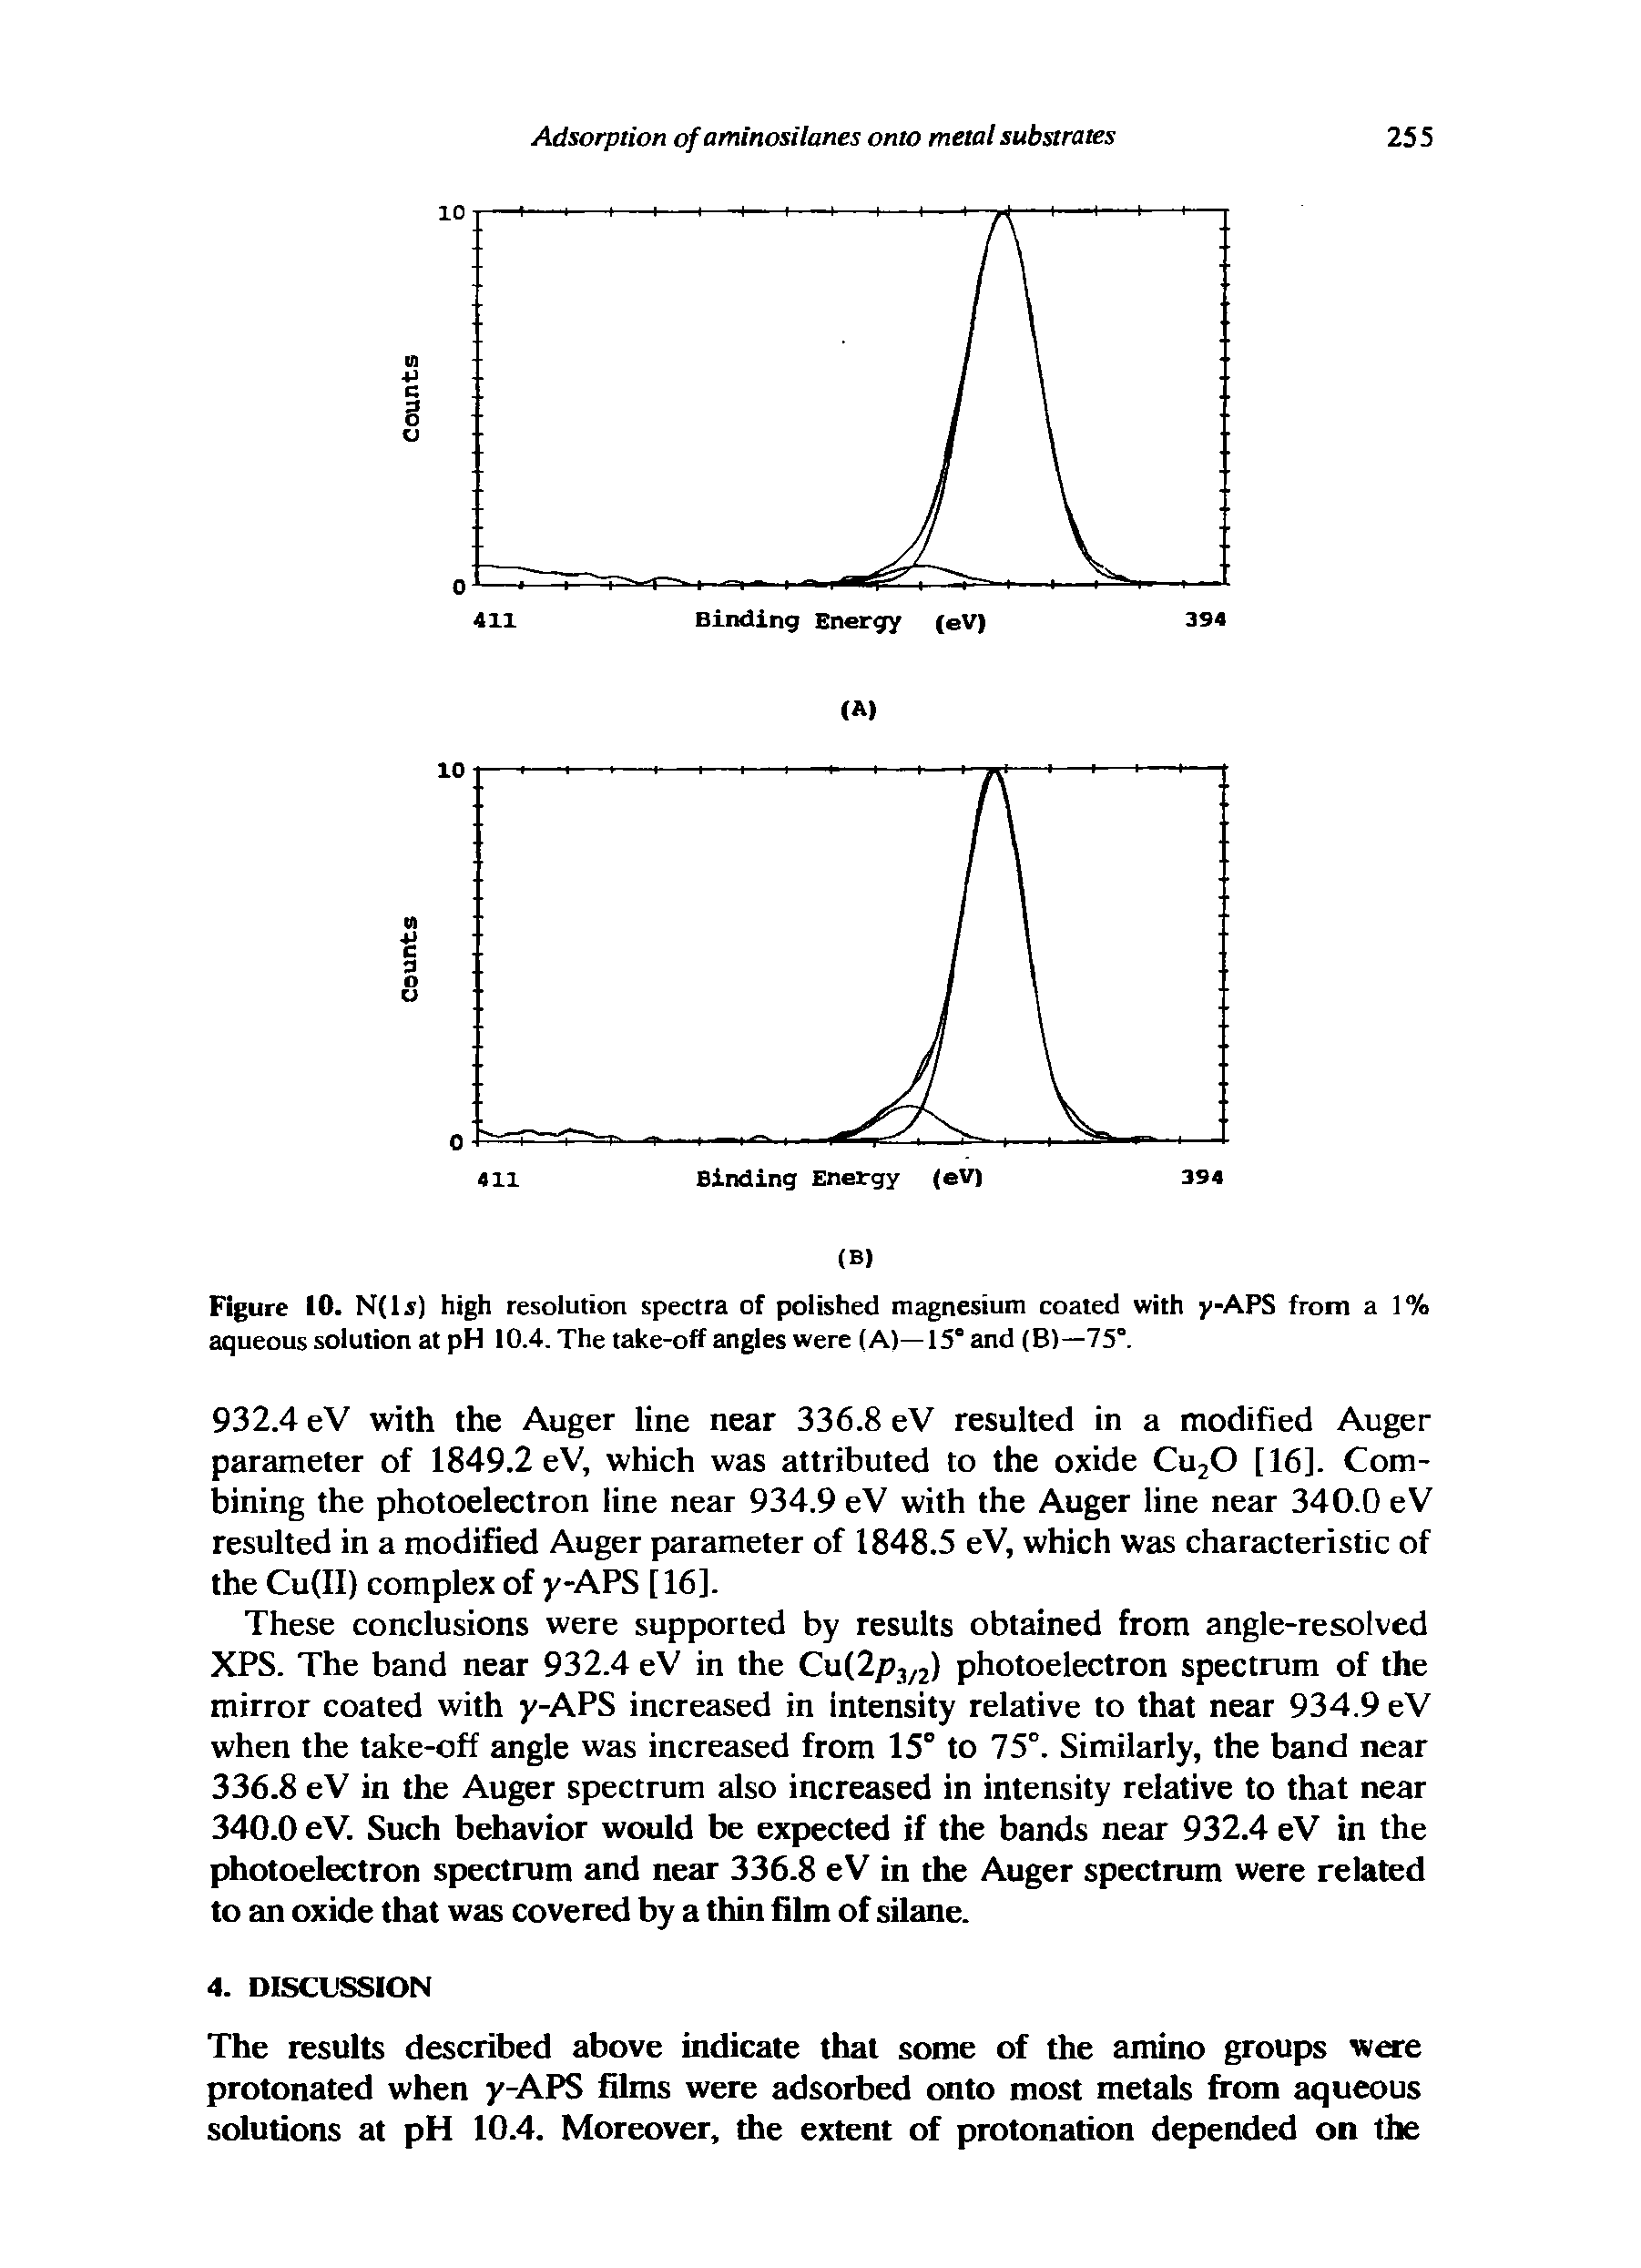 Figure 10. N(ls) high resolution spectra of polished magnesium coated with y-APS from a 1% aqueous solution at pH 10.4. The take-off angles were (A)—15° and (B)—75°.